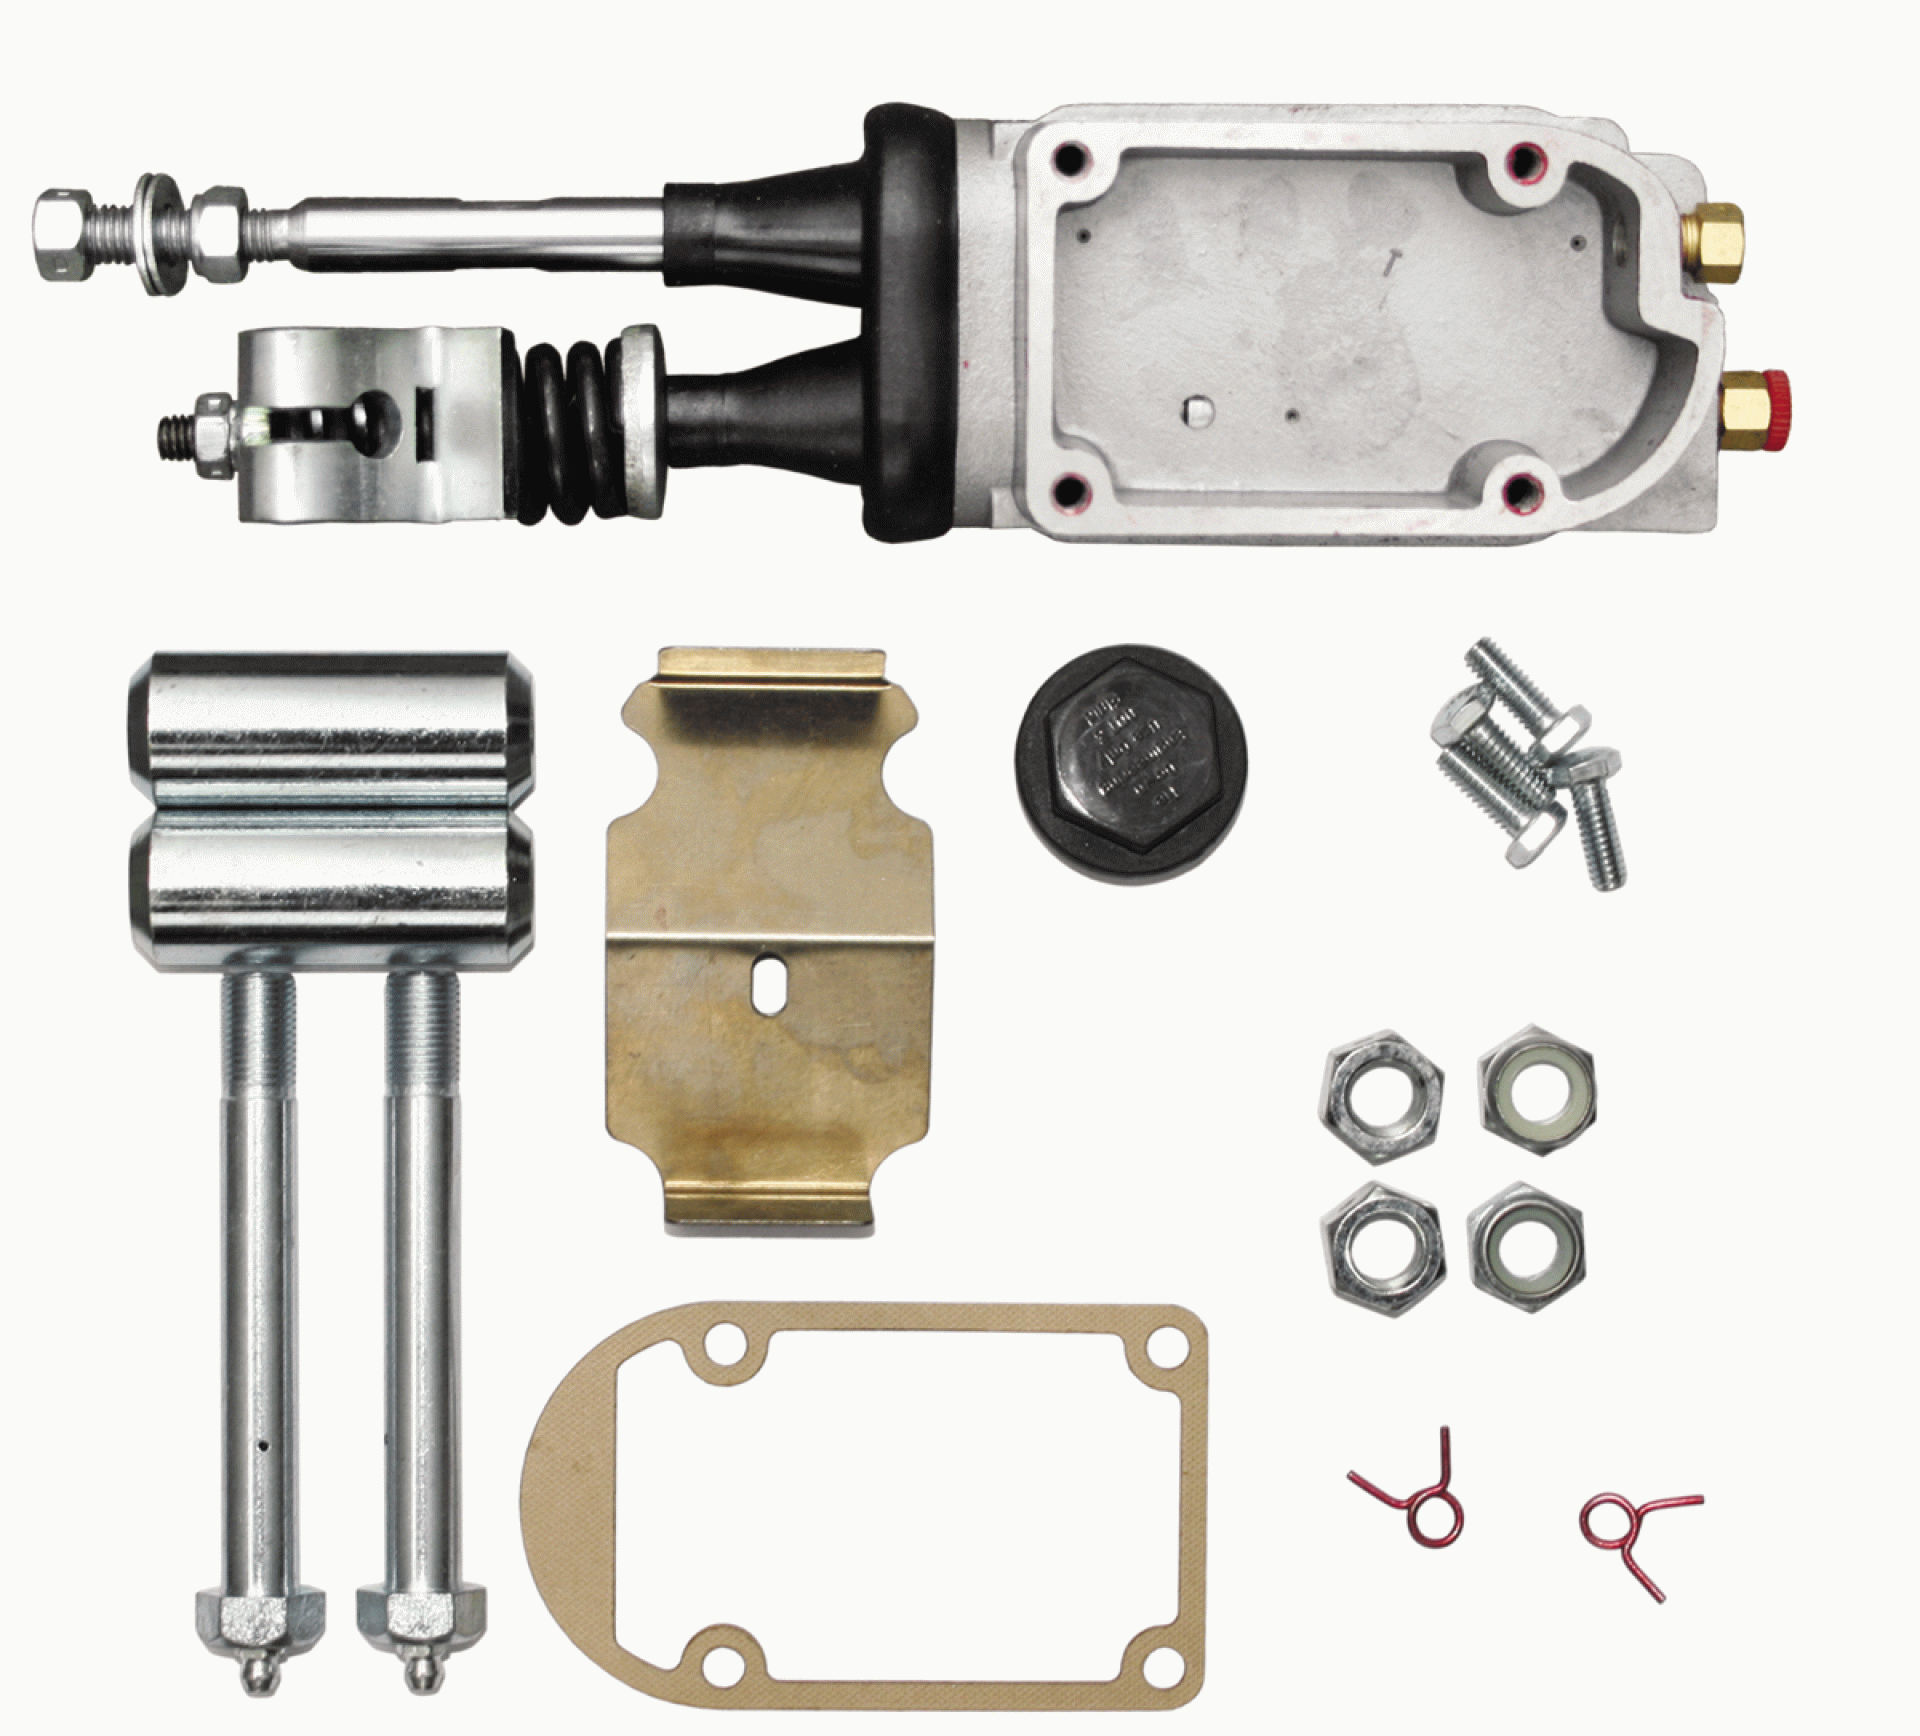 DEXTER MARINE PRODUCTS OF GEORGIA LC | 47268K | ACTUATOR REPAIR KIT FOR DRUM MODELS 66 70 AND 80